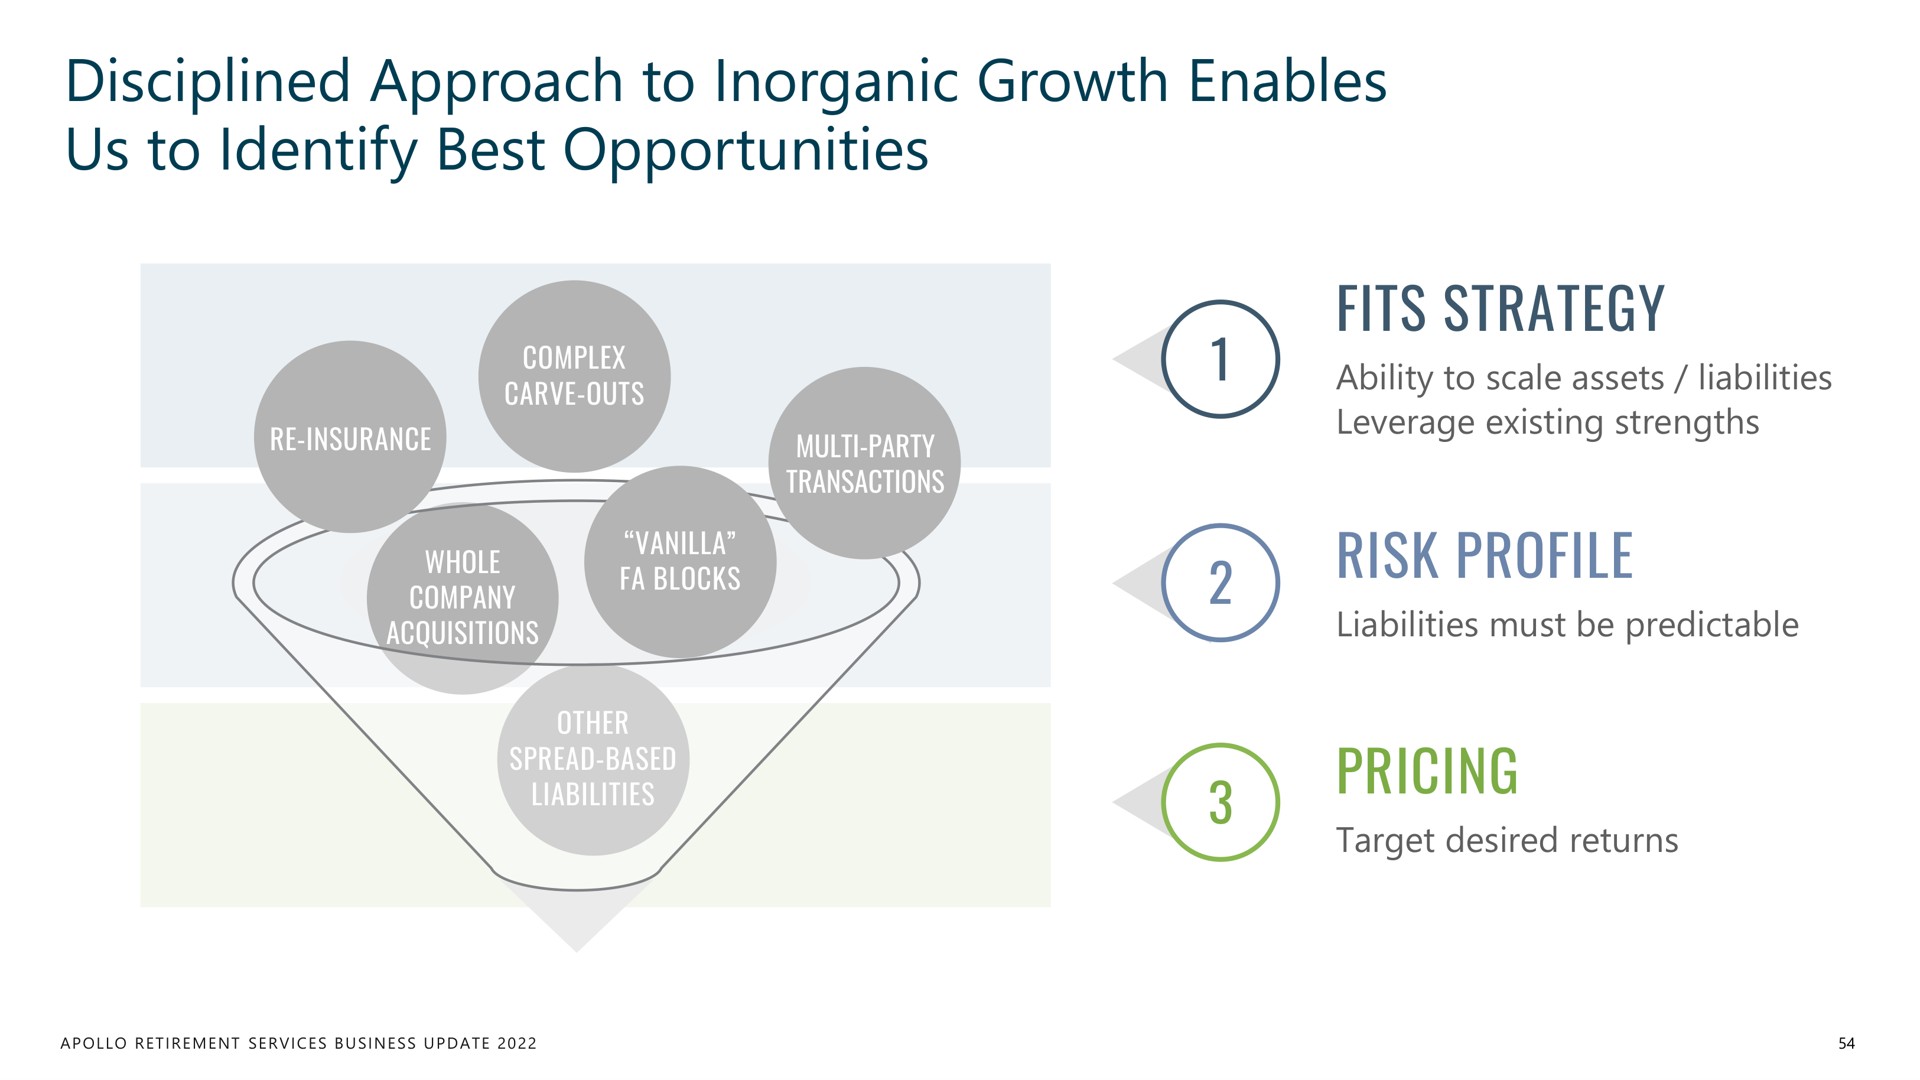 disciplined approach to inorganic growth enables us to identify best opportunities fits strategy risk profile pricing | Apollo Global Management